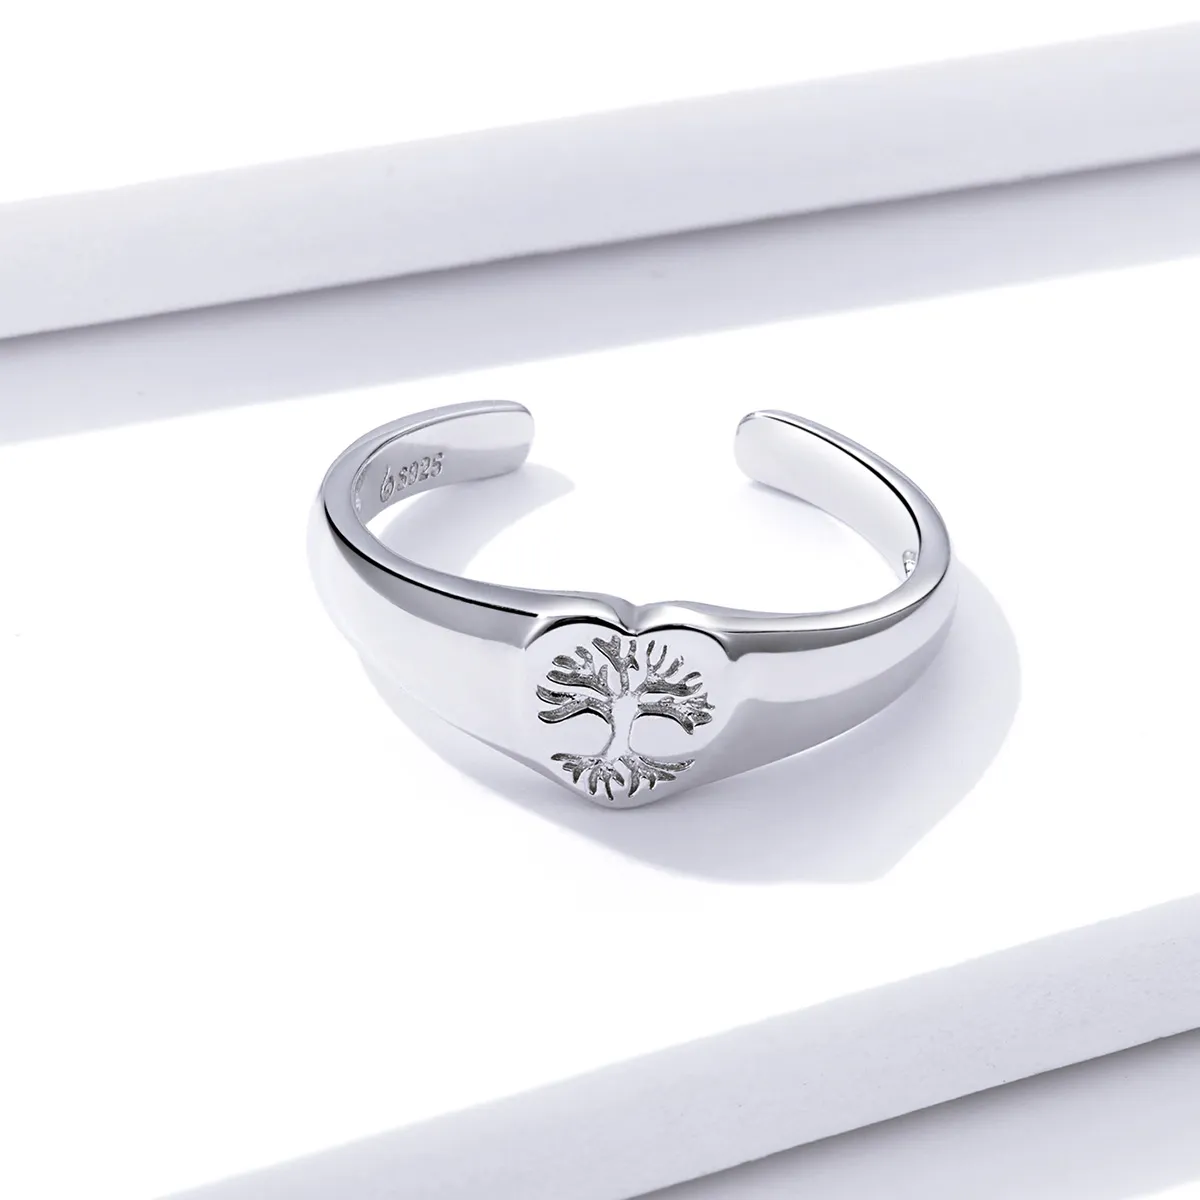 Pandora Style Silver Tree of Life Open Ring - BSR122